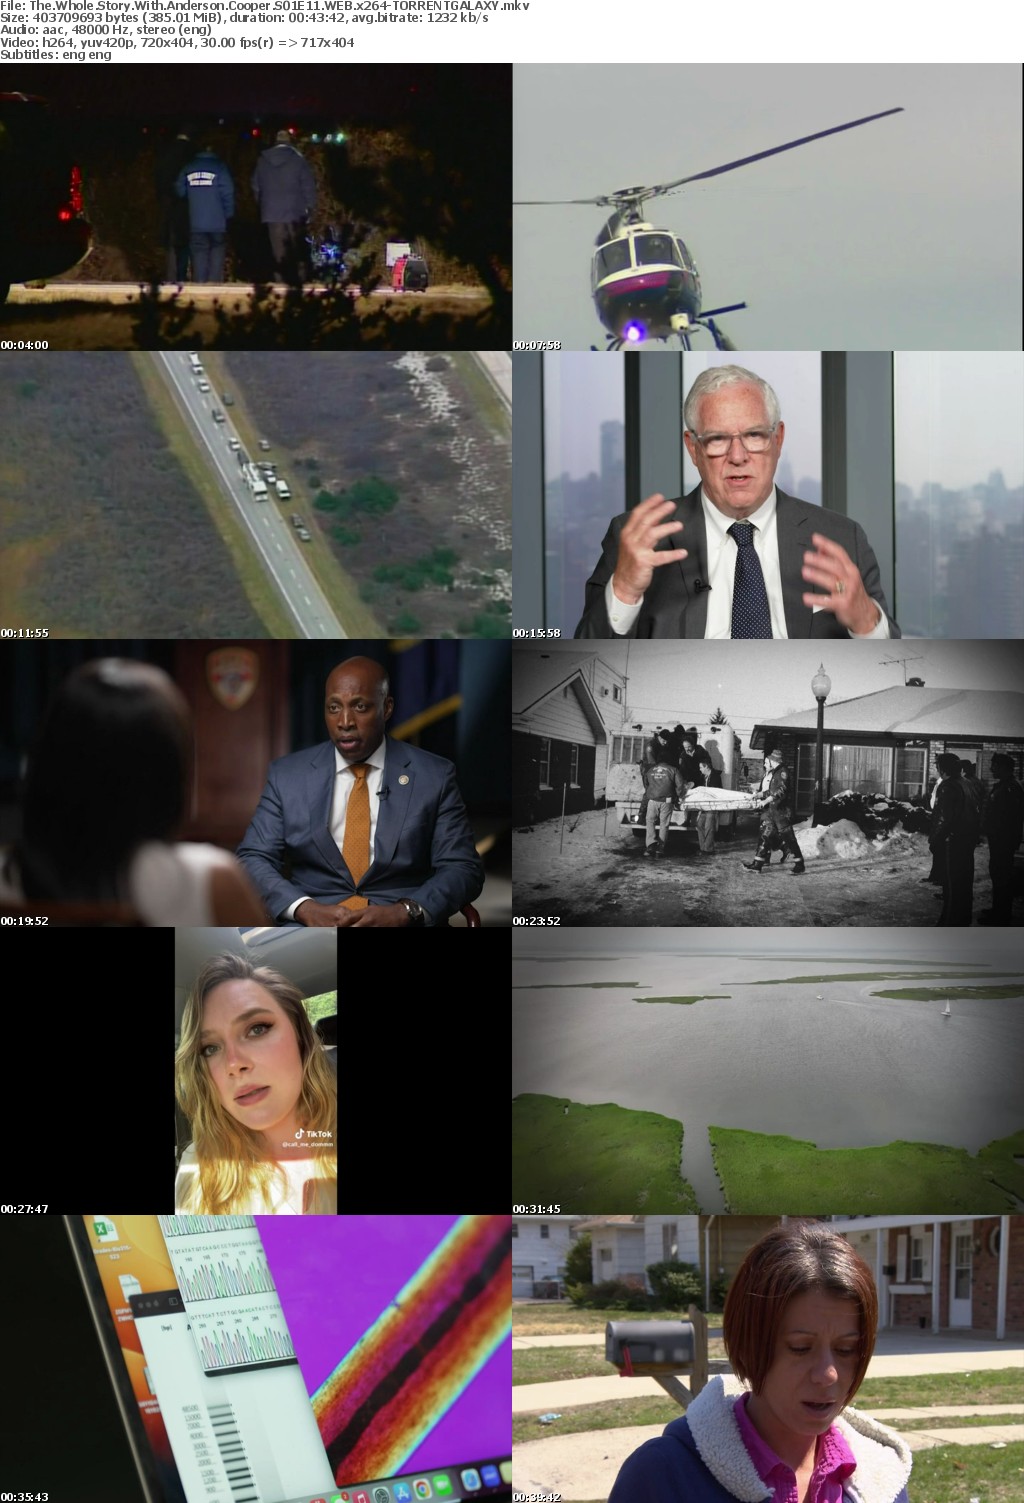 The Whole Story With Anderson Cooper S01E11 WEB x264-GALAXY